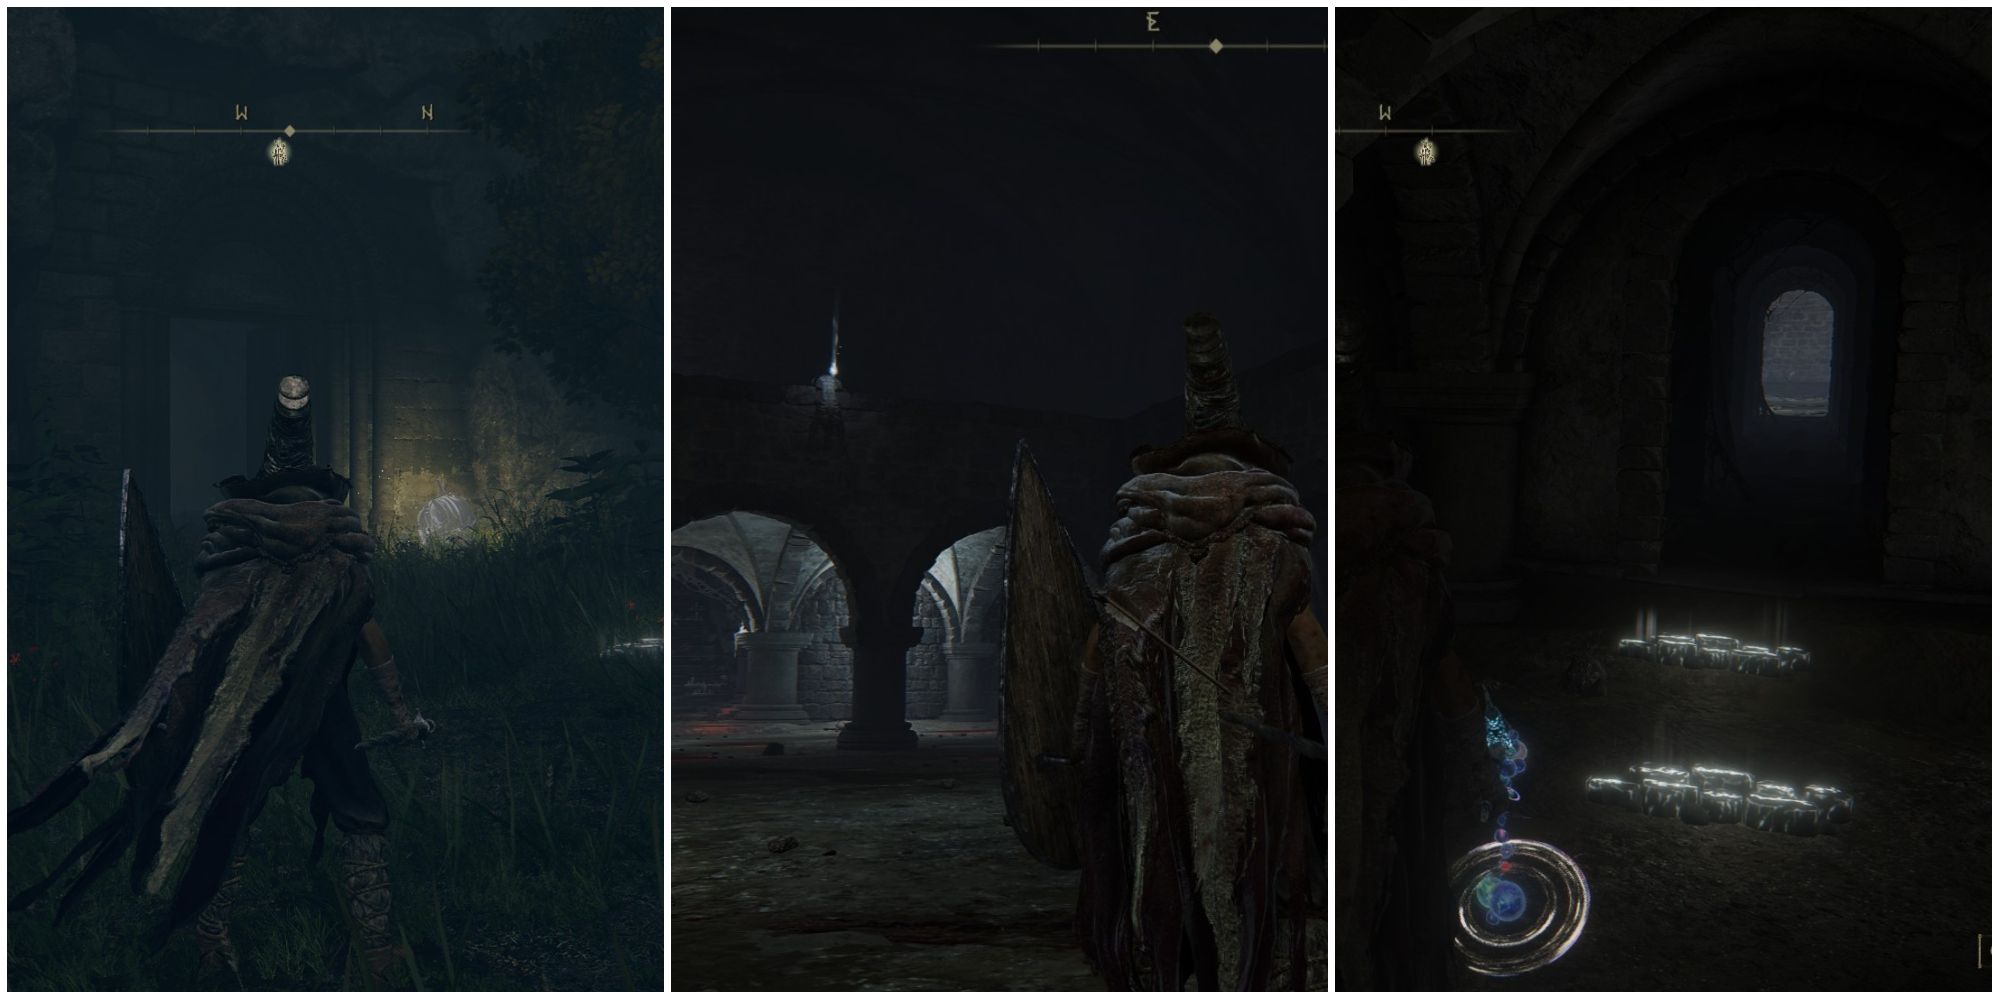 Elden Ring uchigatana location in deathtouched catacombs